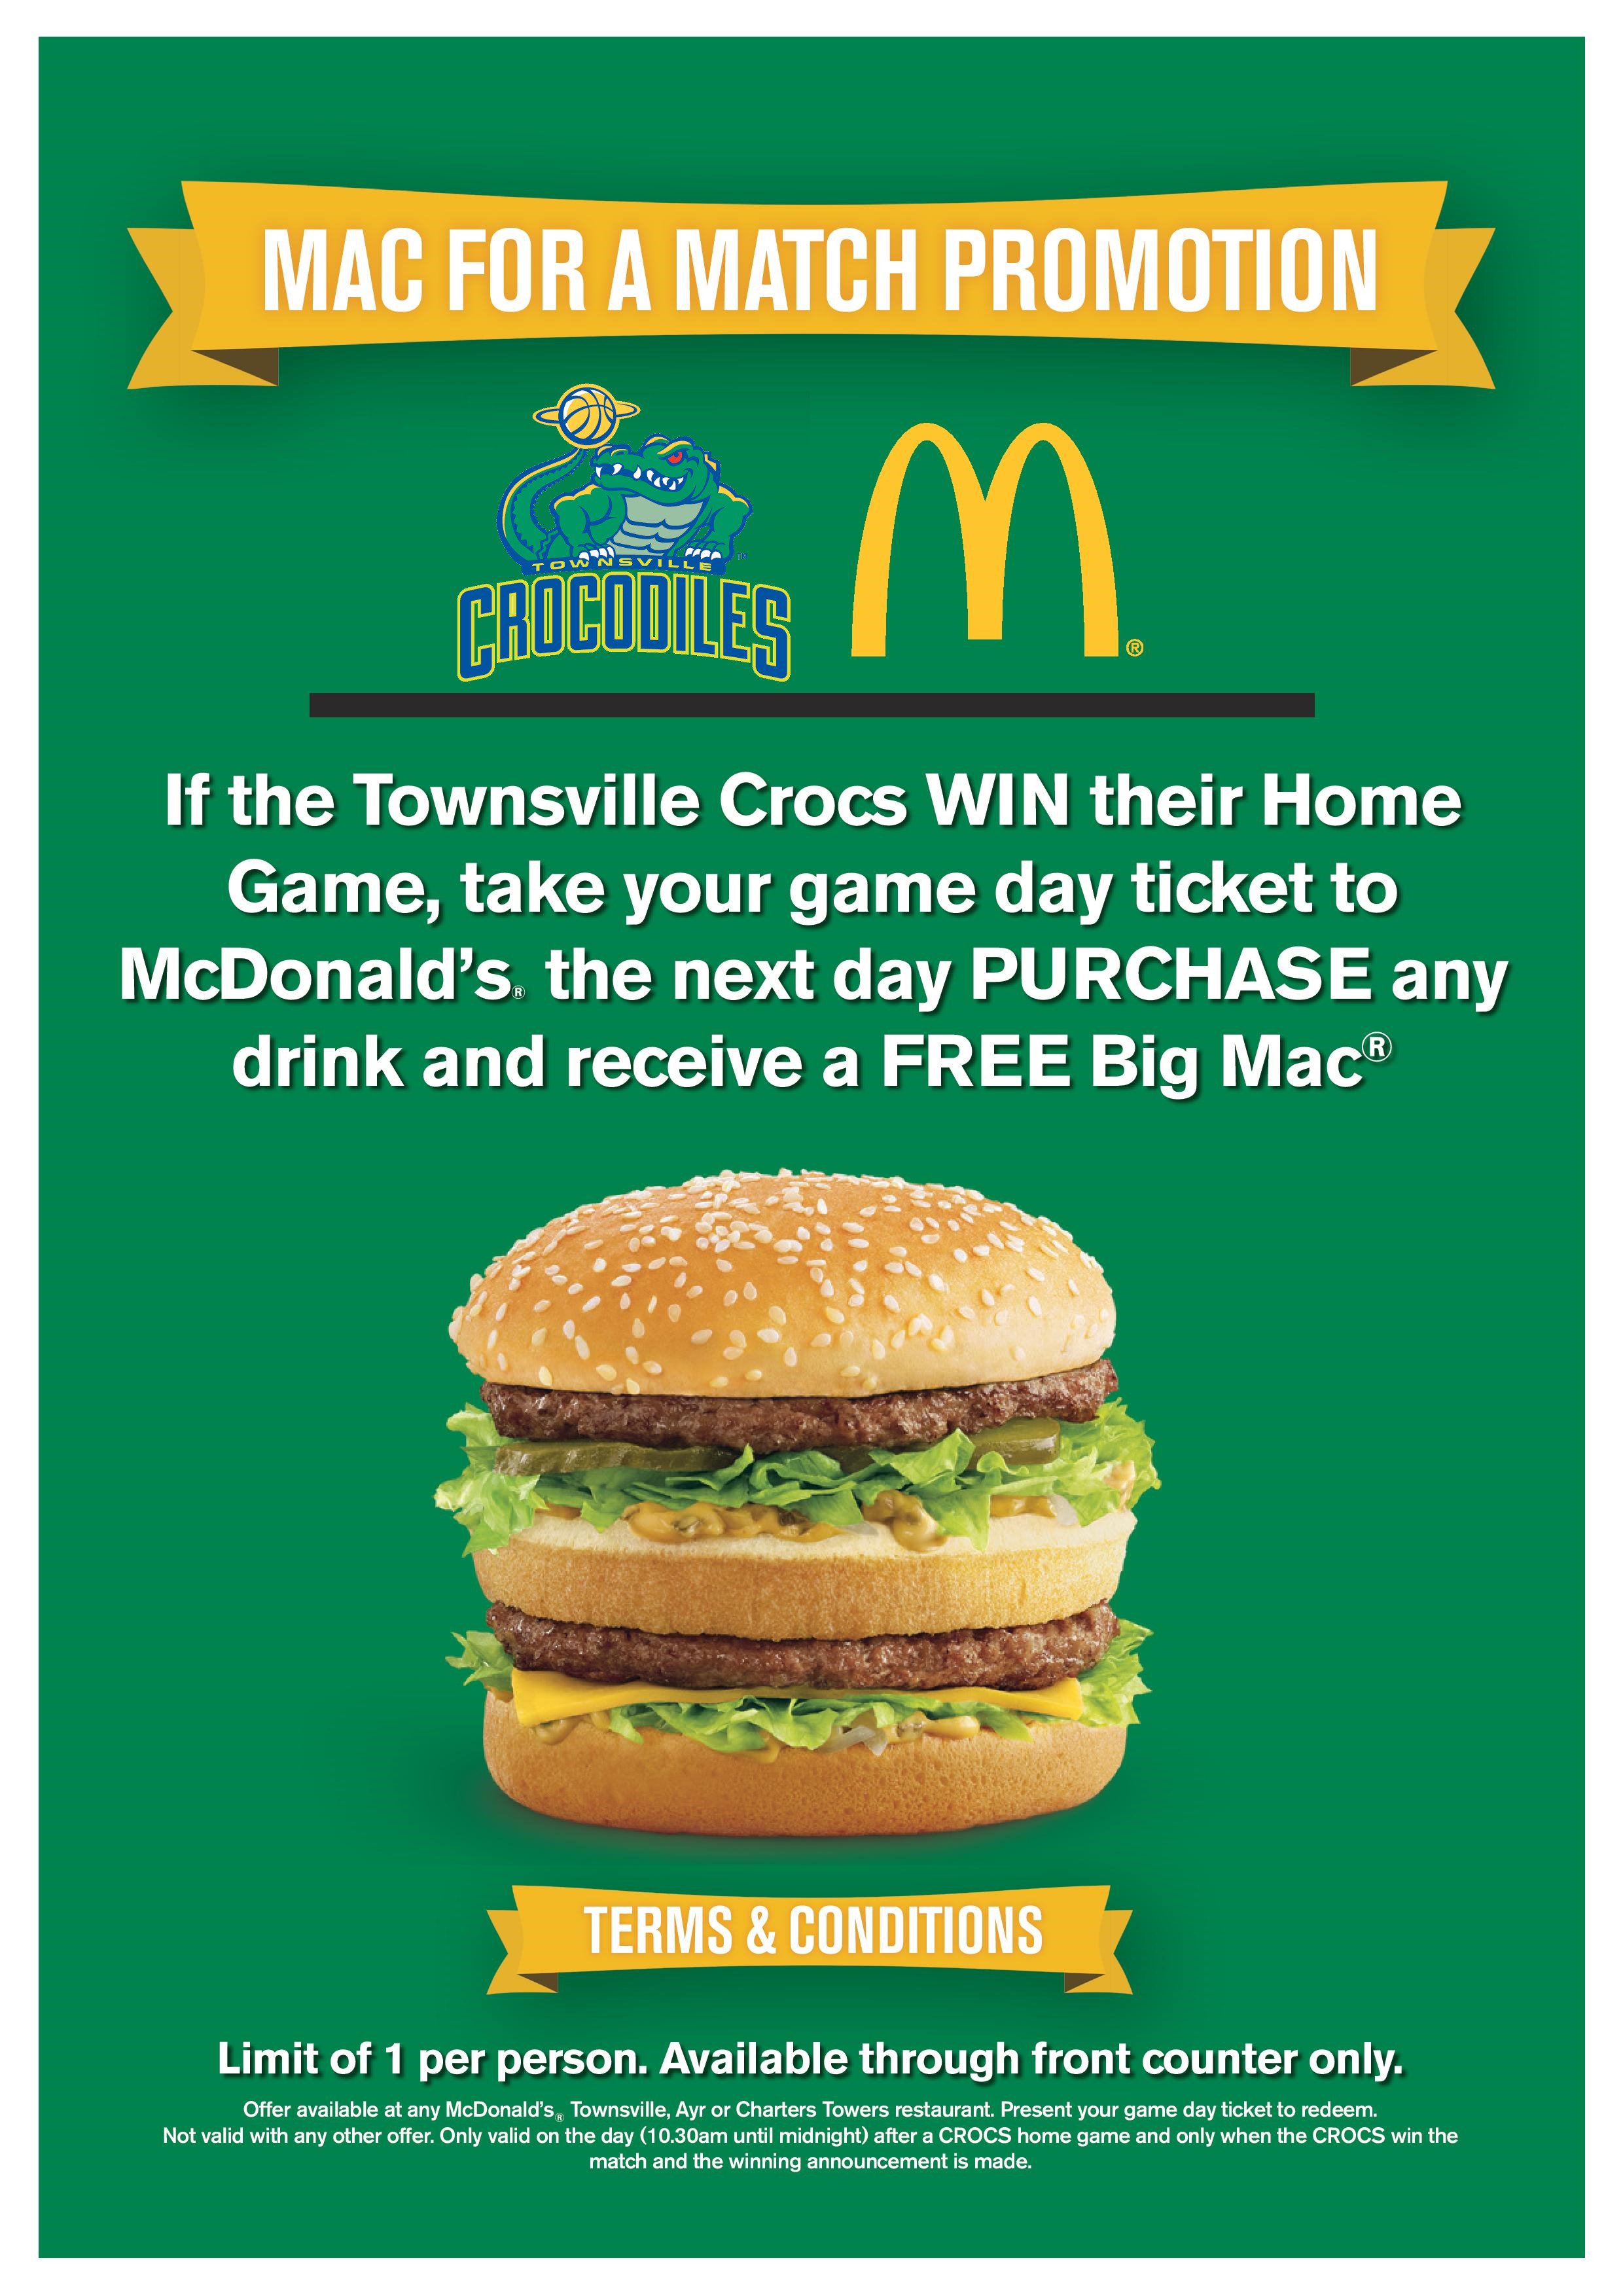 TownsvilleCrocodiles on "FREE MAC'S ARE BACK: If the @TsvCrocs win, you win, Free Big Mac from @McDonalds! #Townsville #McDonalds https://t.co/7eh1XTfsb5" /